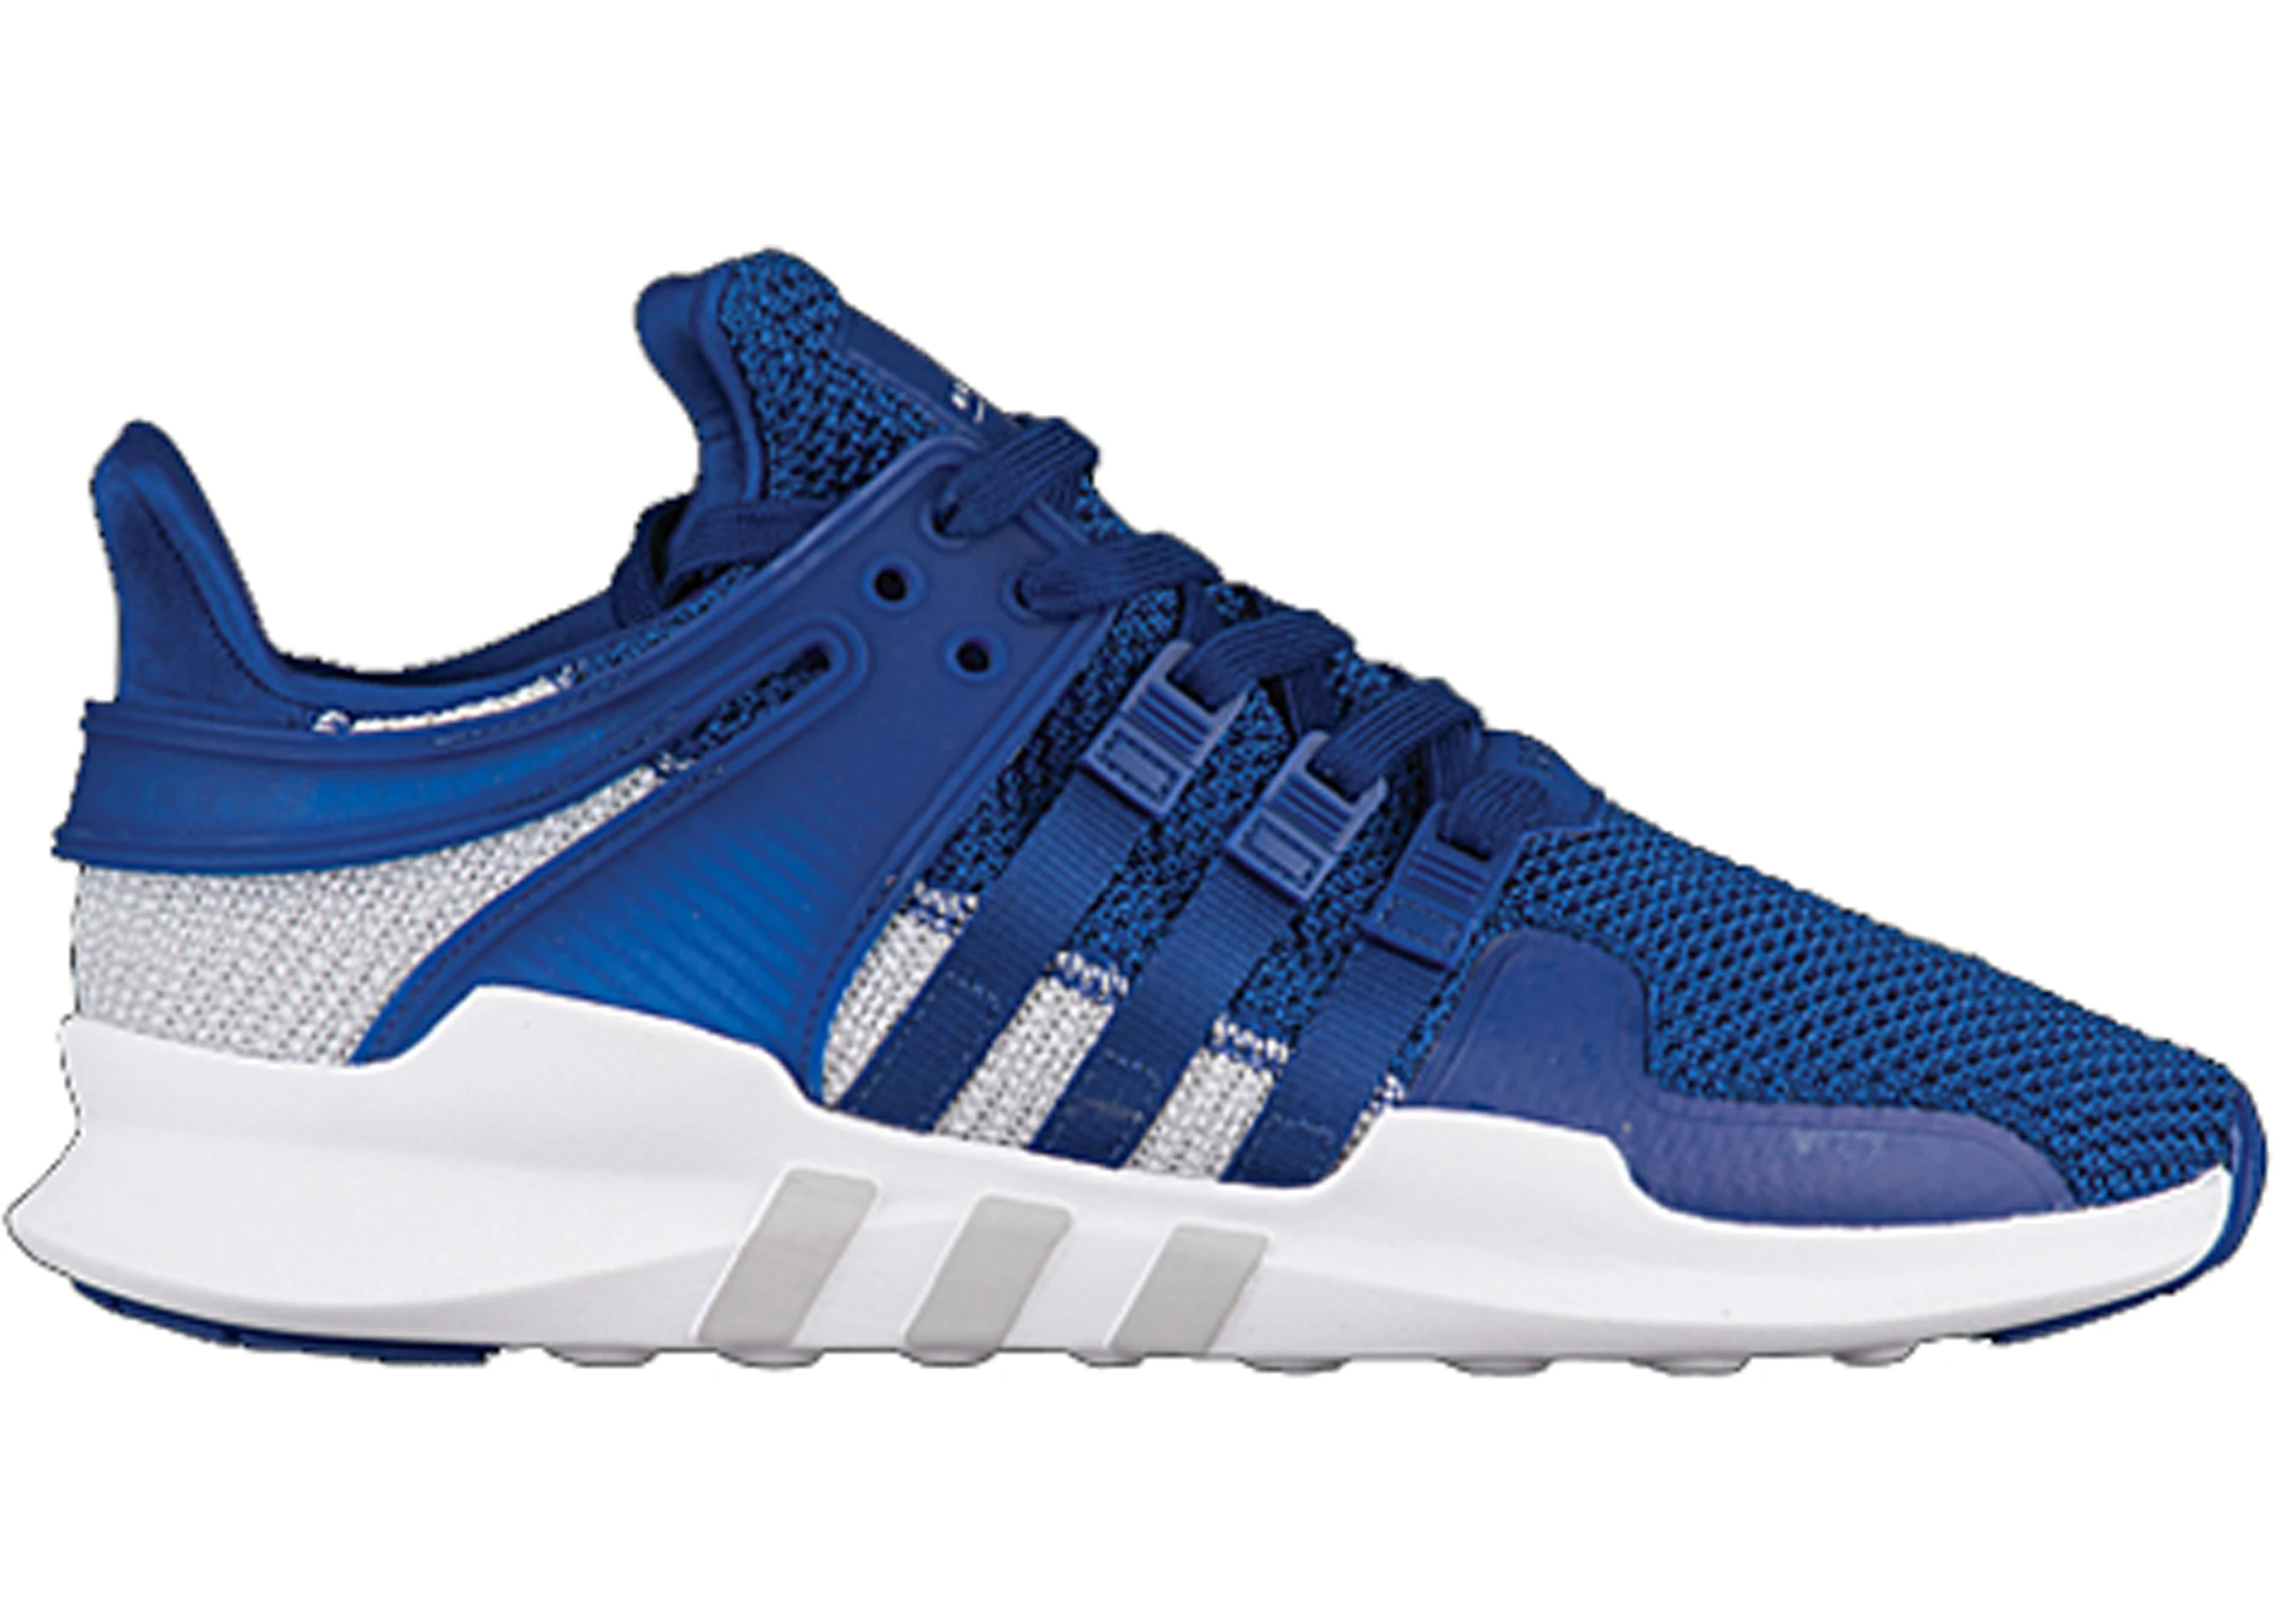 adidas EQT Support Adv Mystery Ink - BY9590 -